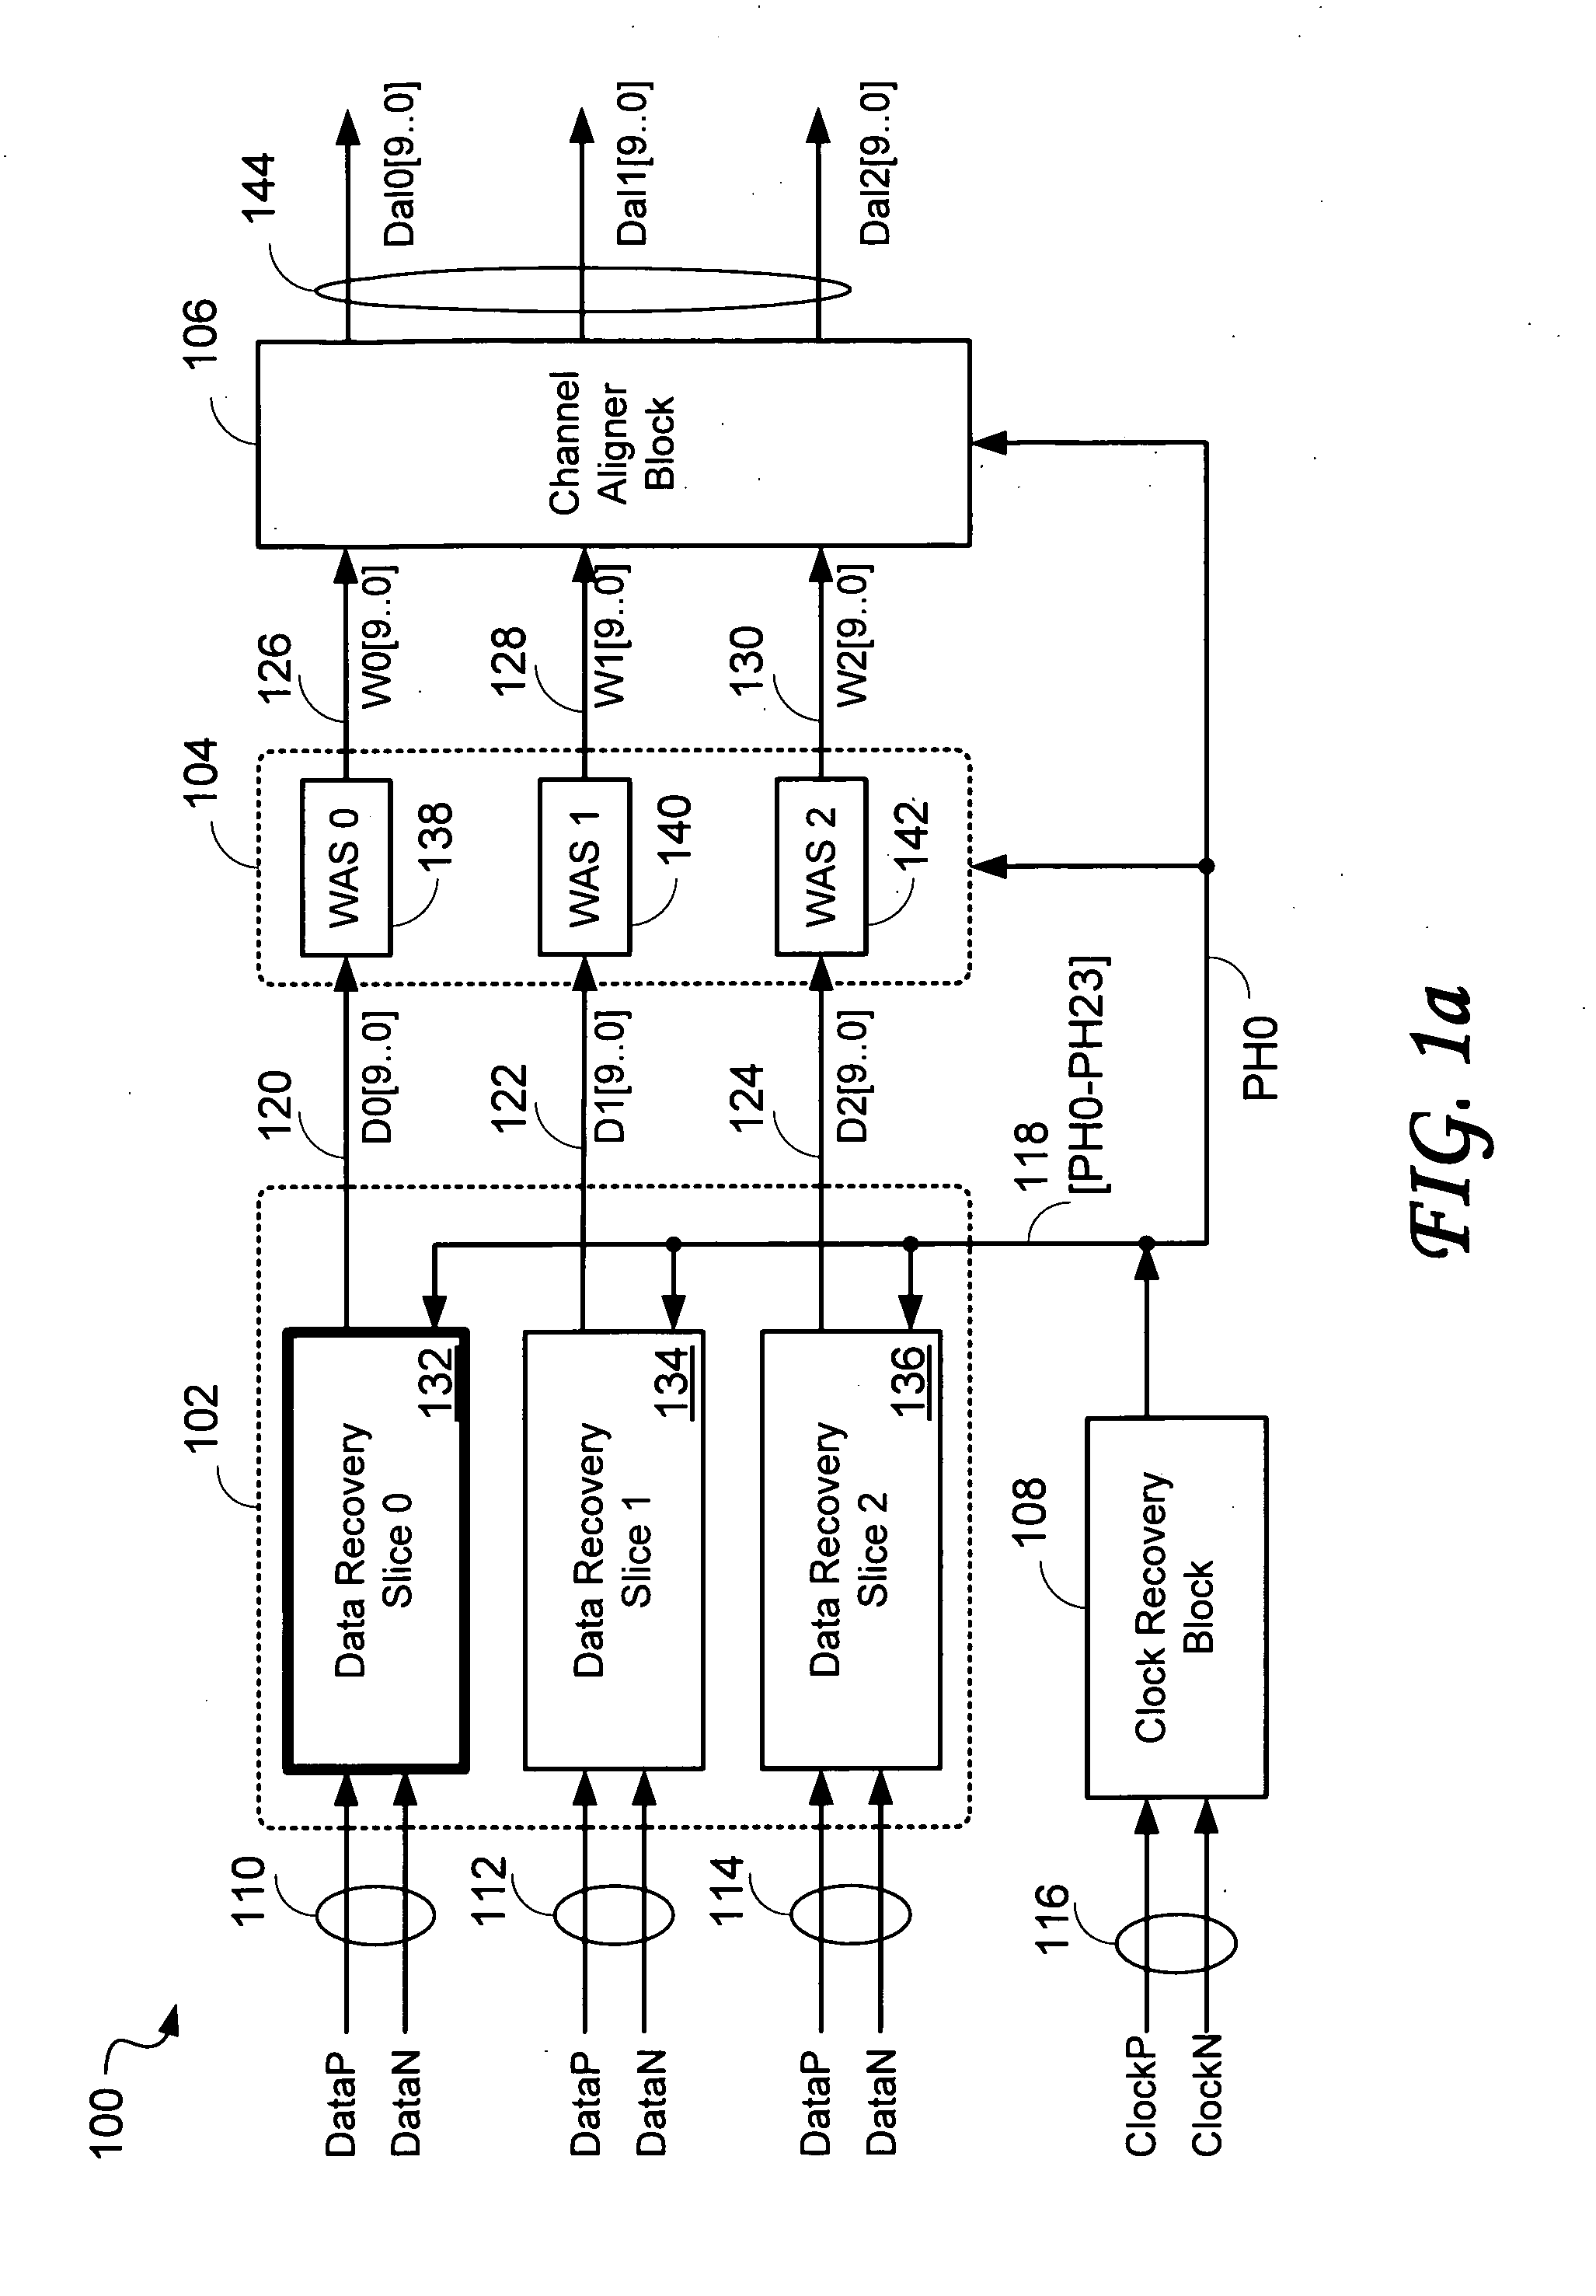 Data recovery system for source synchronous data channels